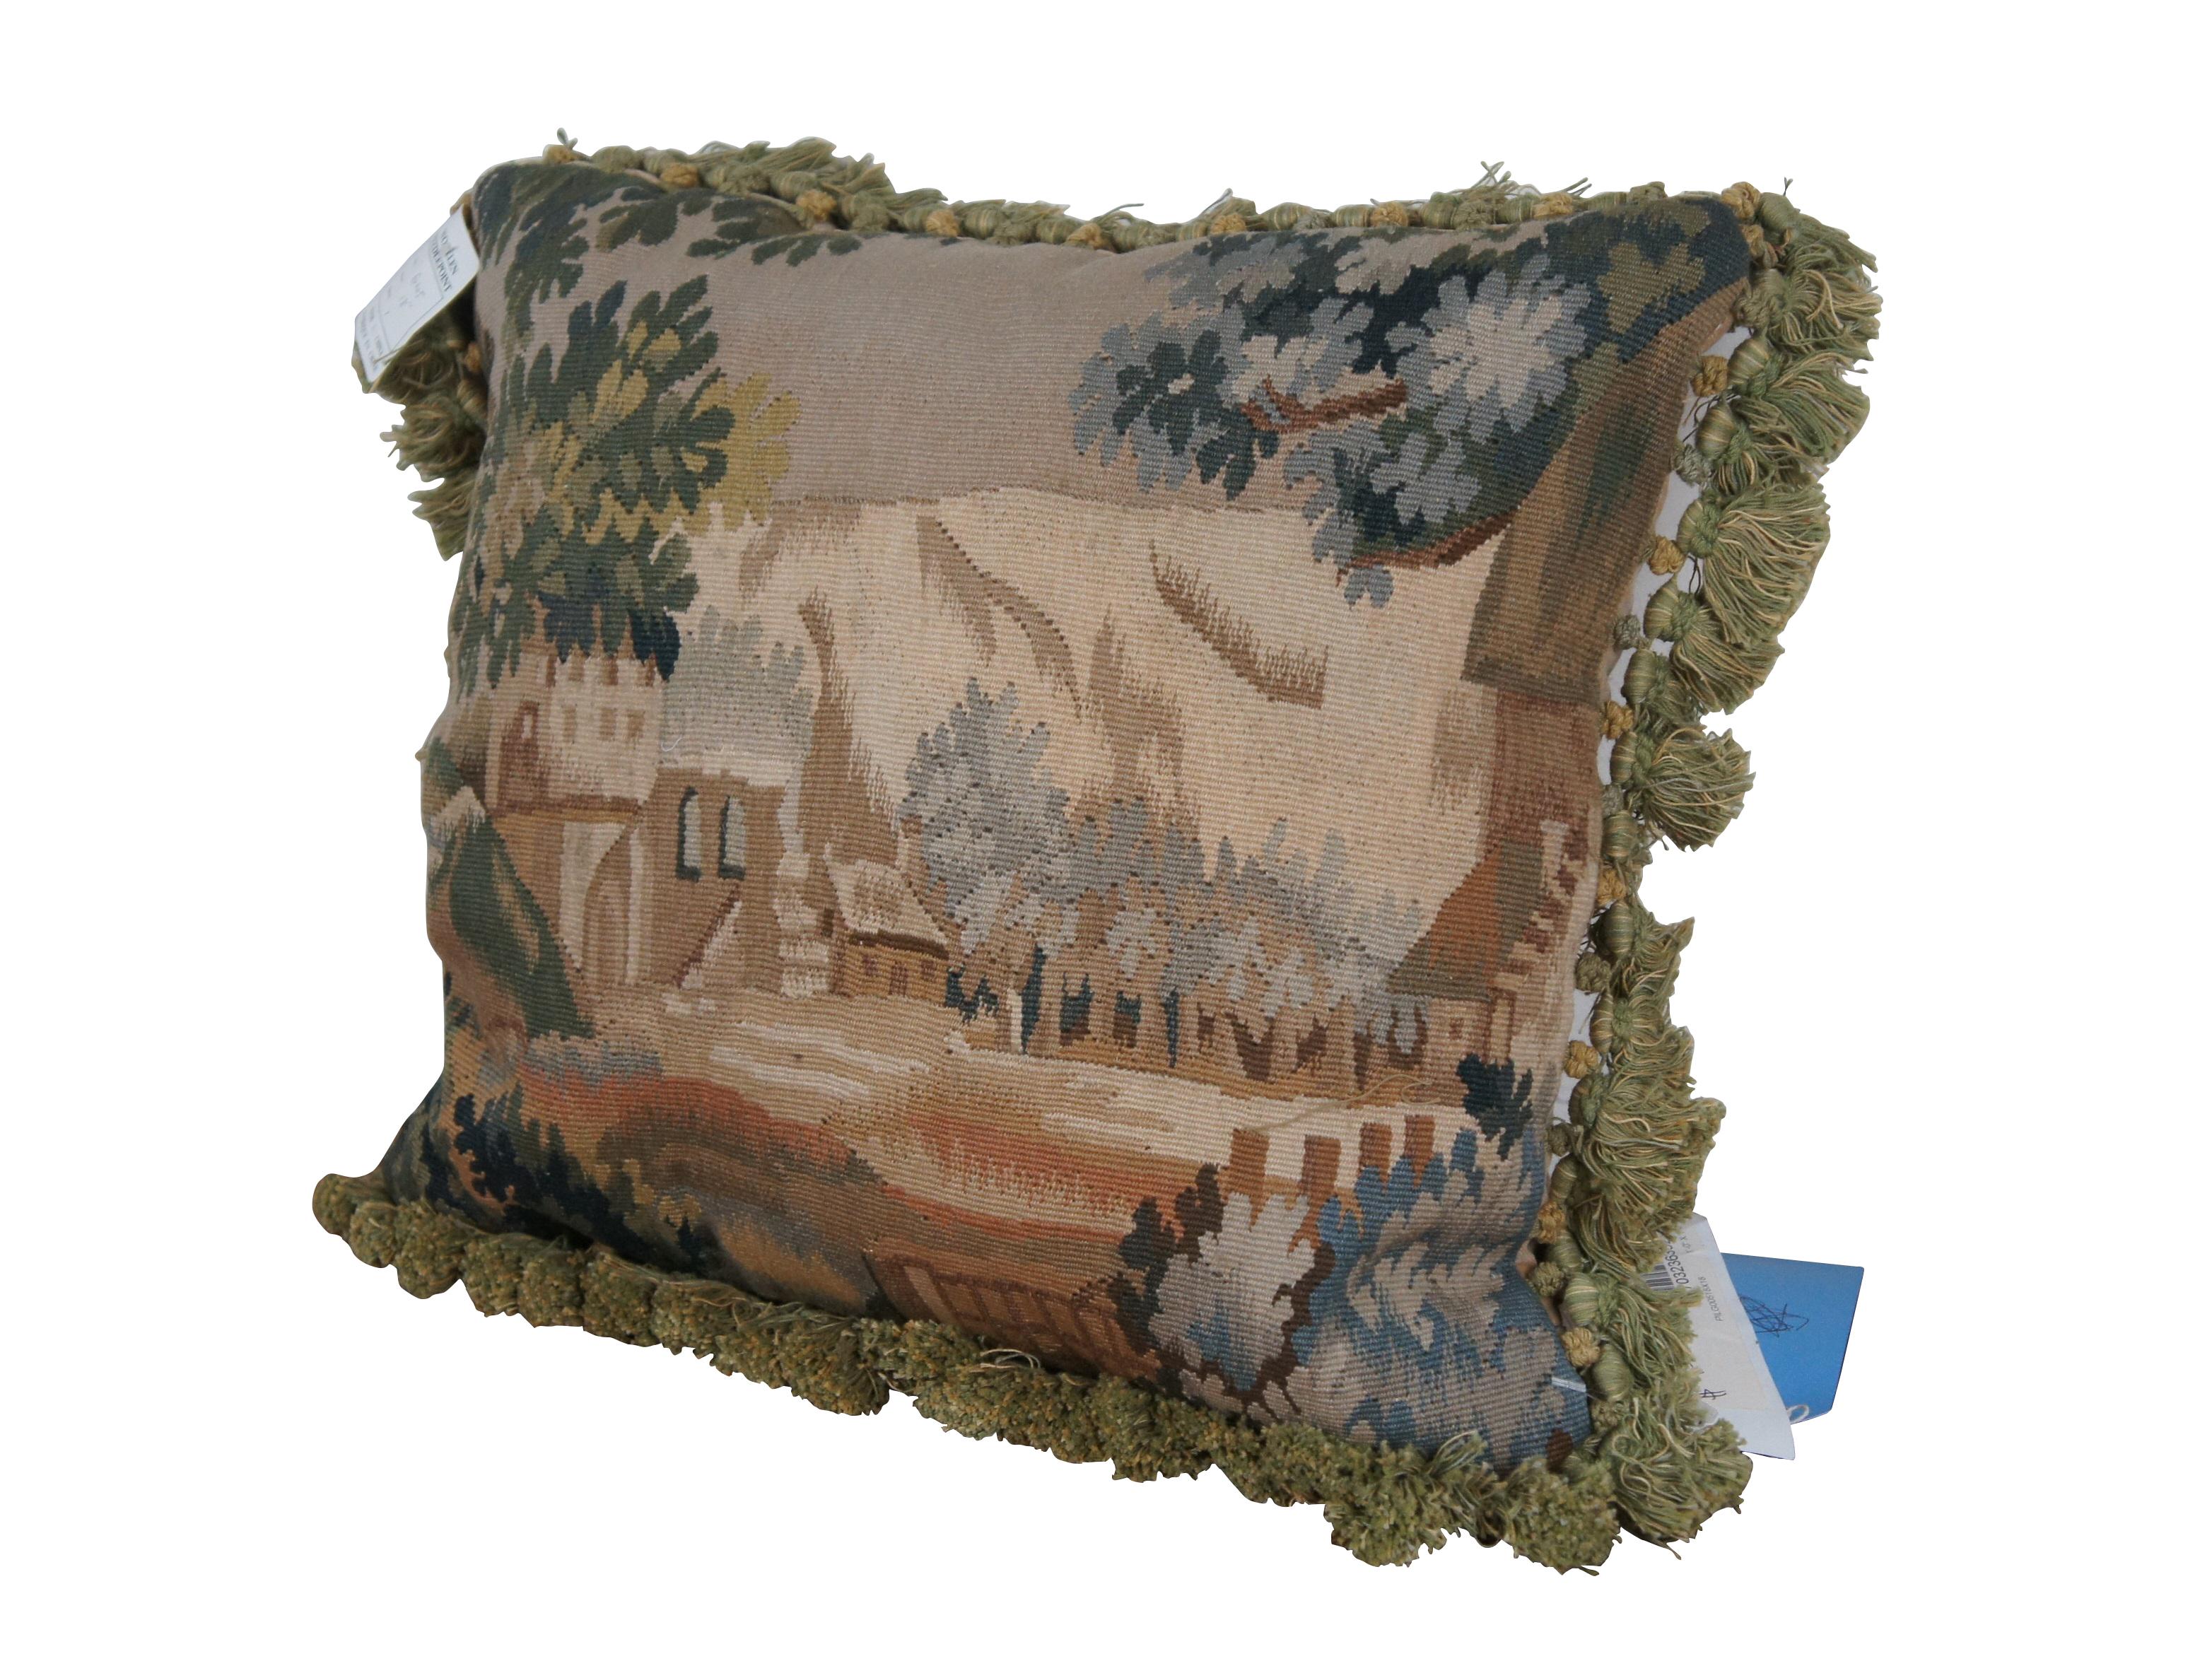 4 Available - 20th century French Aubusson style square throw pillow, embroidered in wool with a castle peeping through a forested landscape. Down Filled. Green and gold tassel trim. Light brown velour back with zipper closure. 

Dimensions:
18